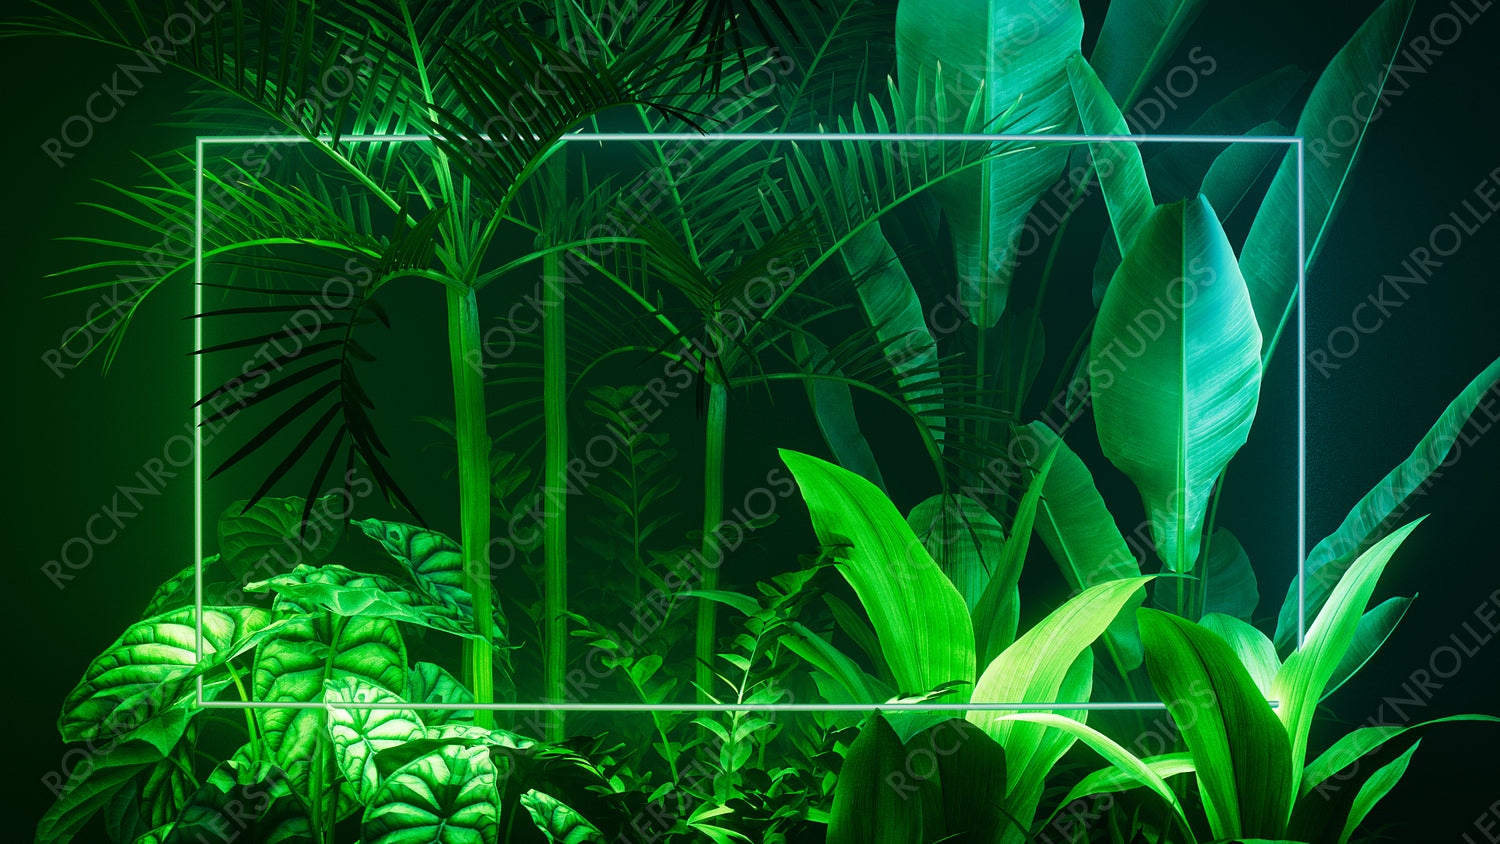 Futuristic Background Design. Tropical Leaves with Green and Blue, Rectangle shaped Neon Frame.